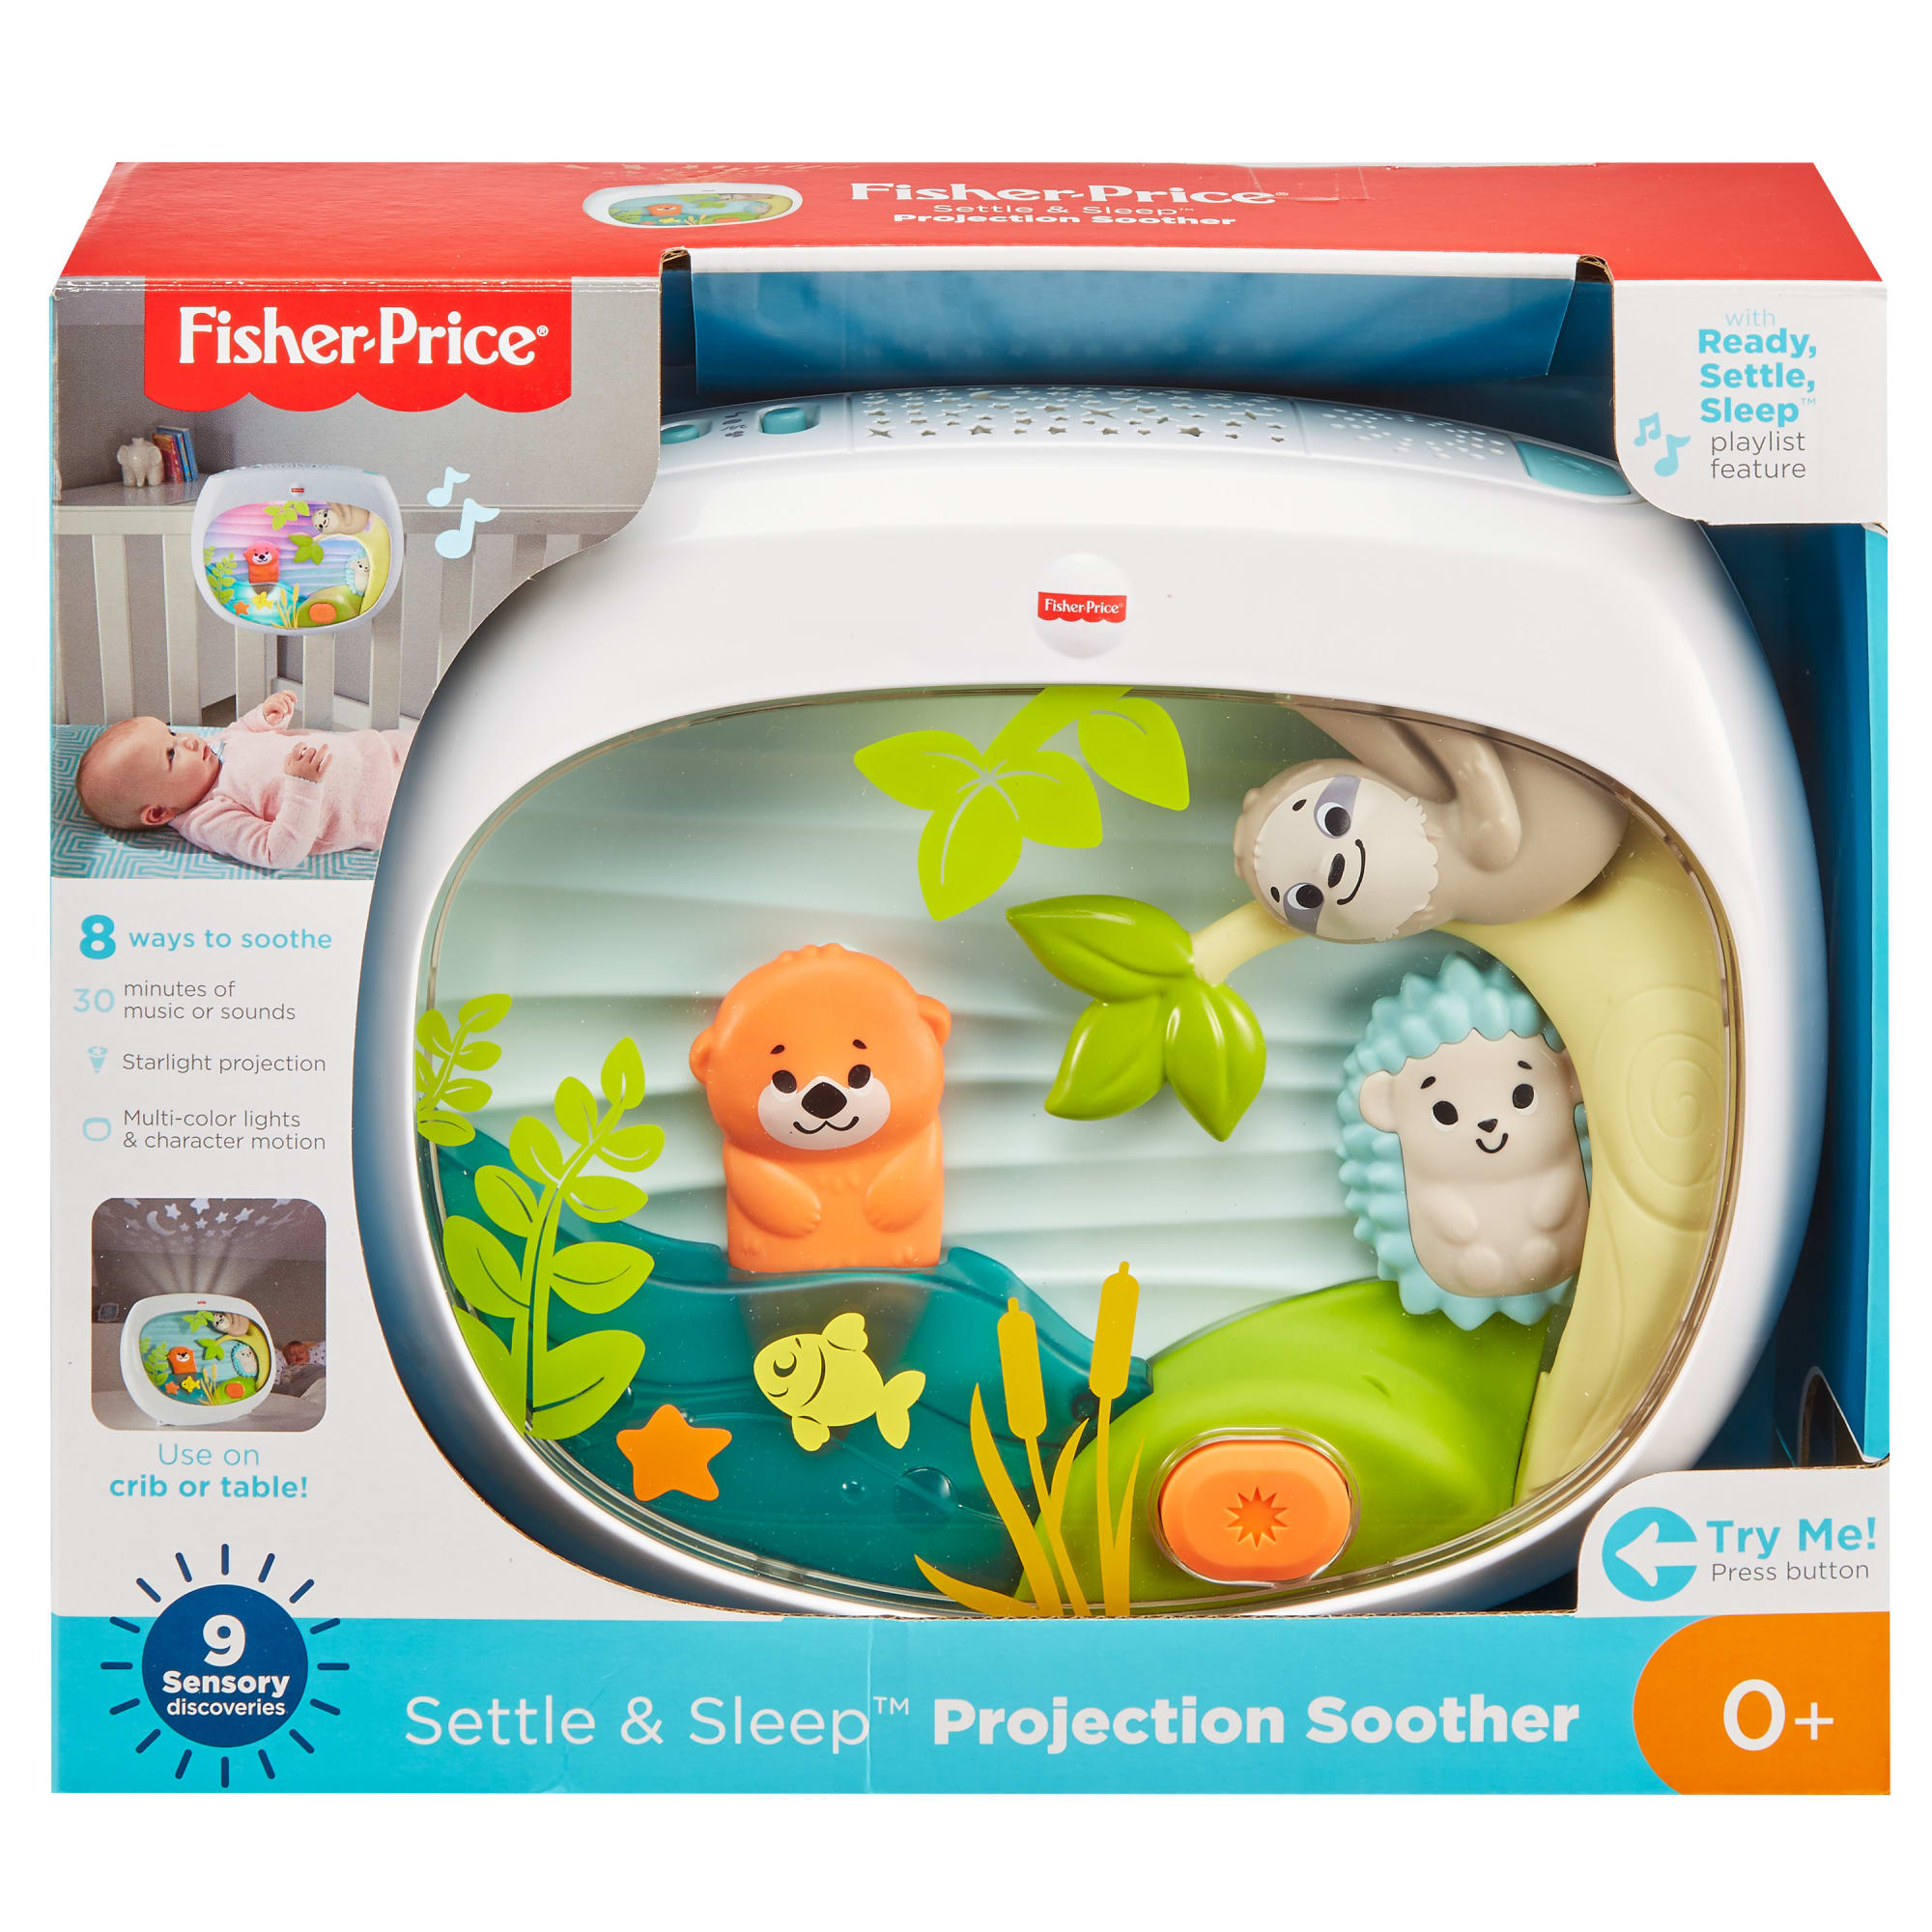 Fisher-Price Settle & Sleep Projection Soother | Mattel